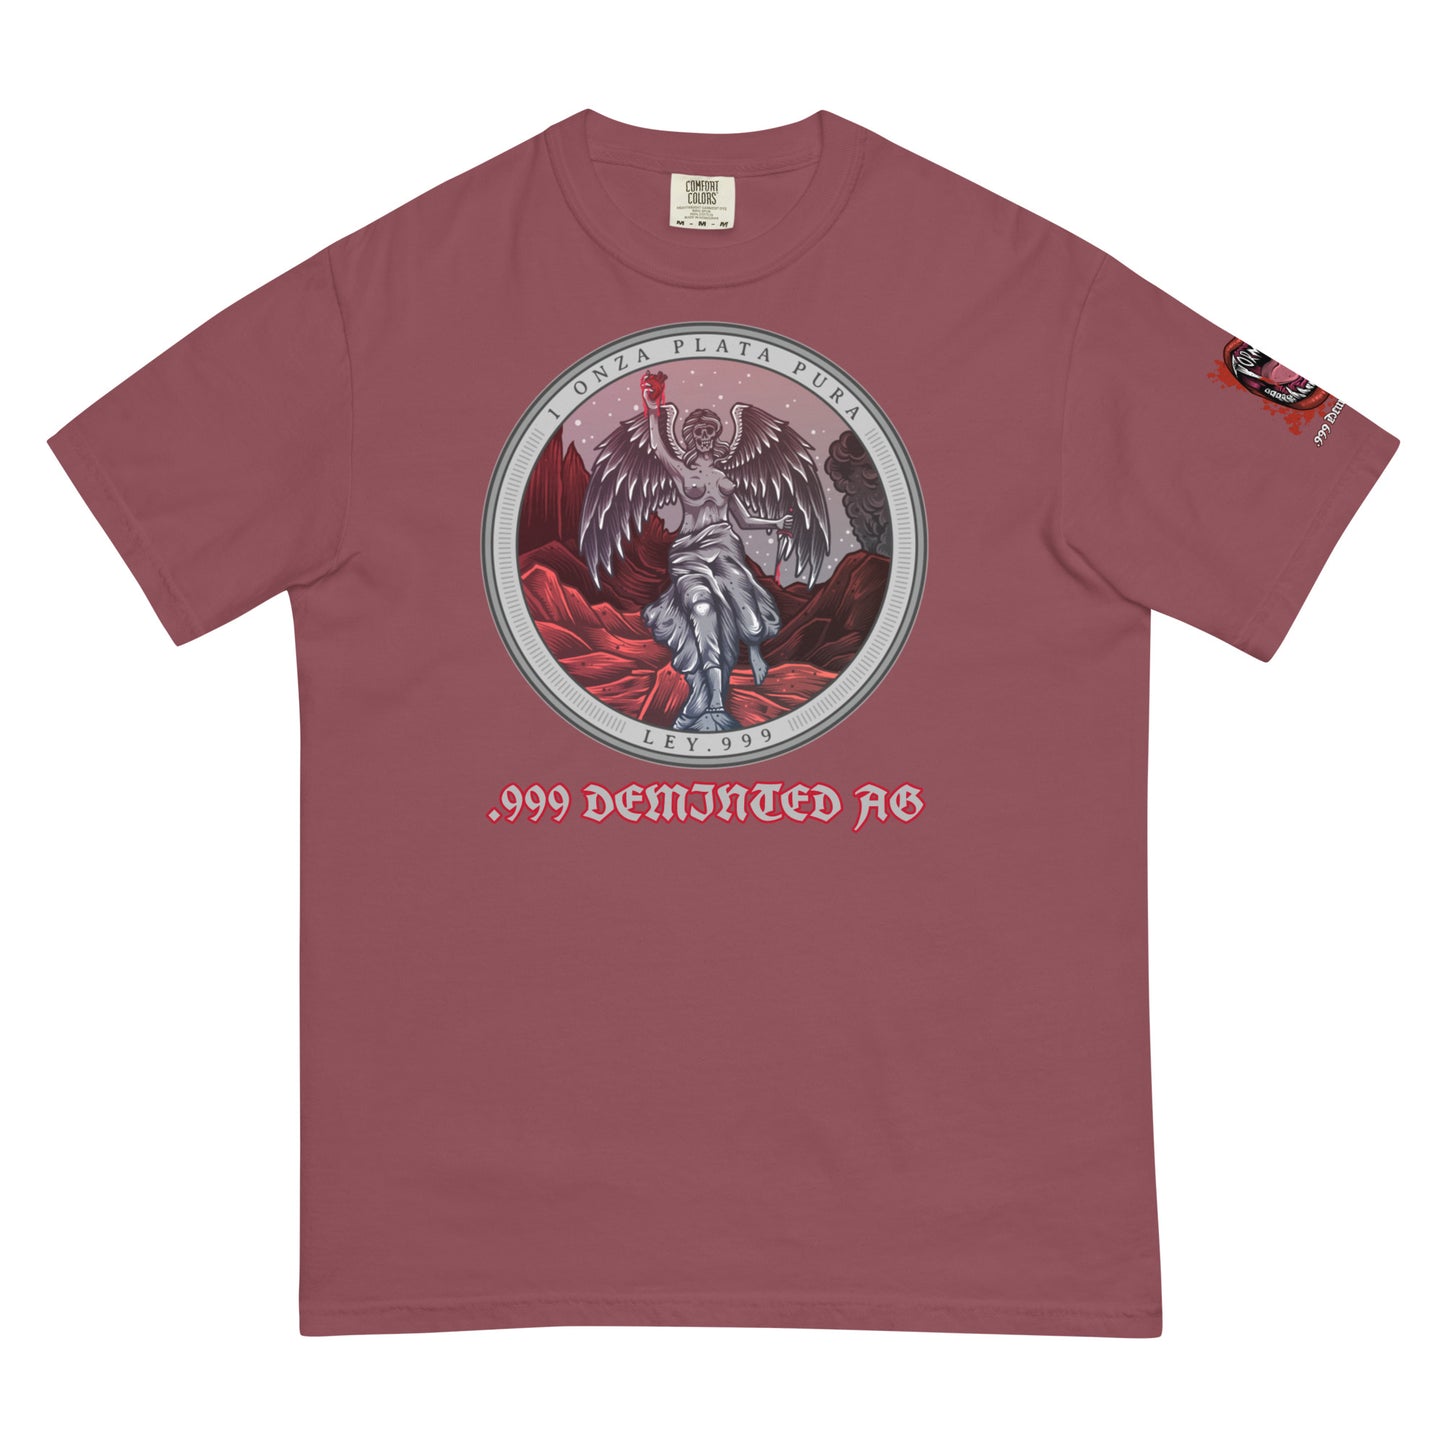 Tormintad Double Sided w/ Vampire logo on left sleeve dyed heavyweight t-shirt